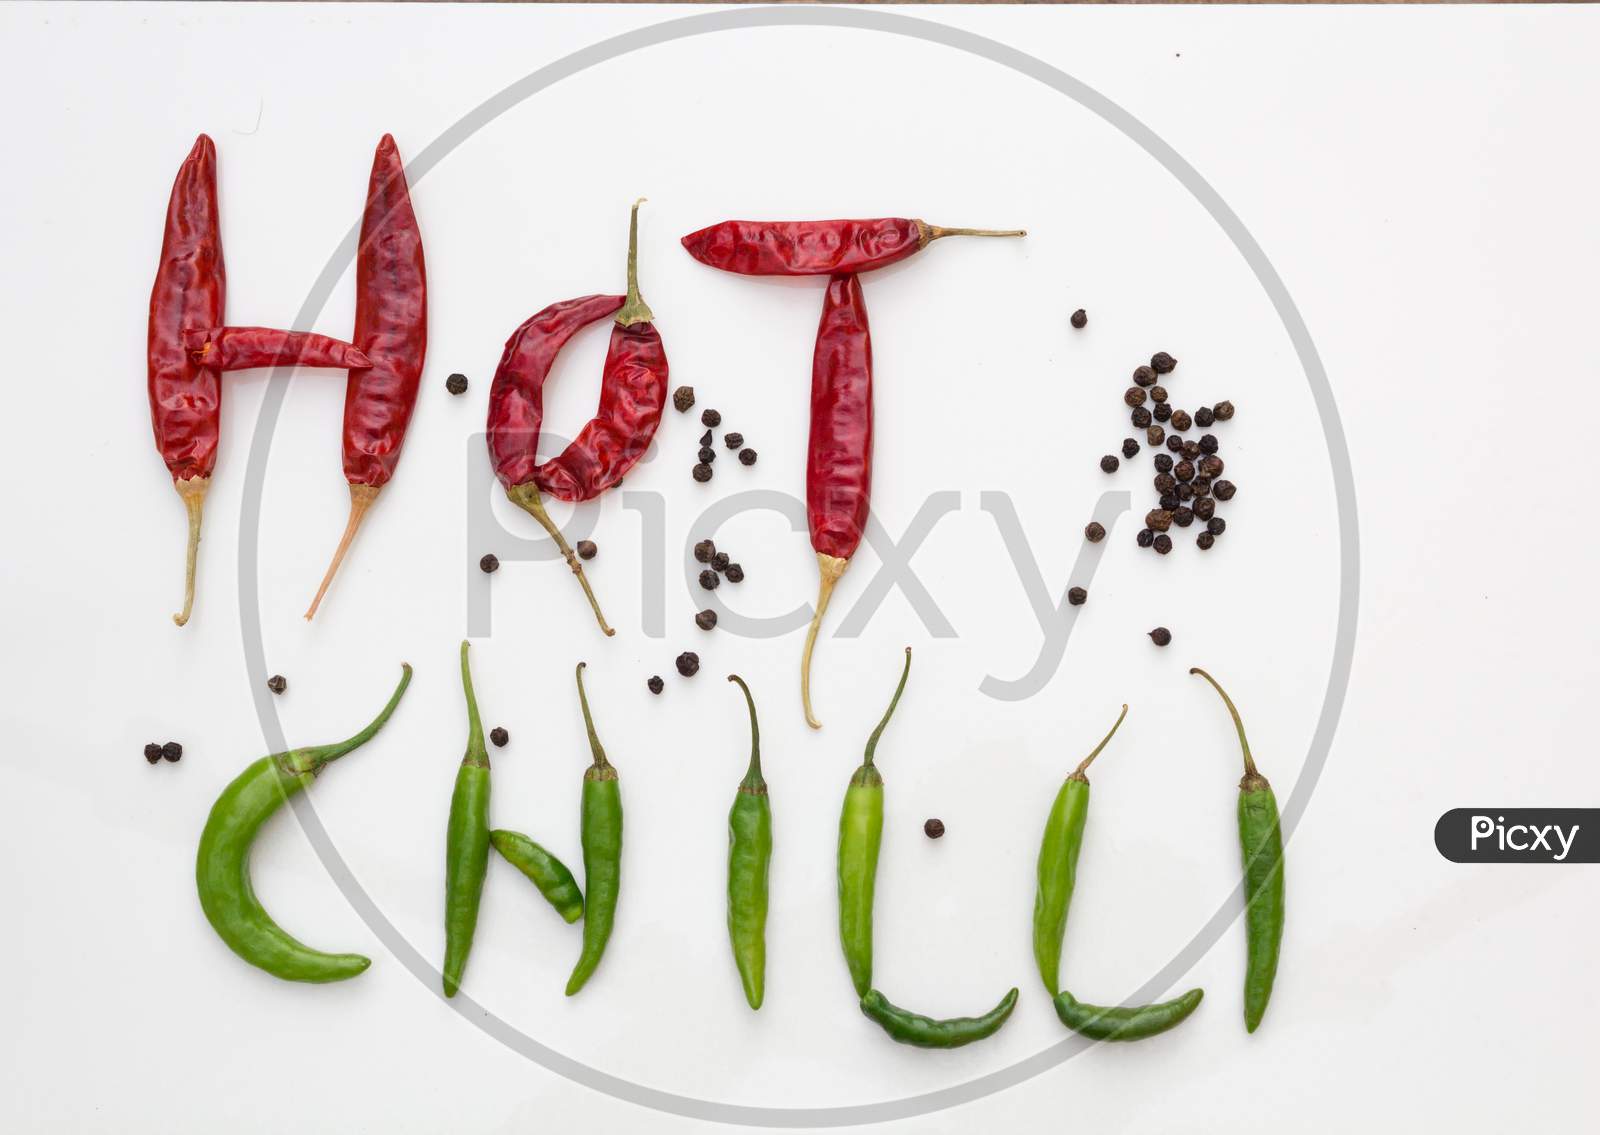 Indian Hot Chilies in a pattern in food photography.